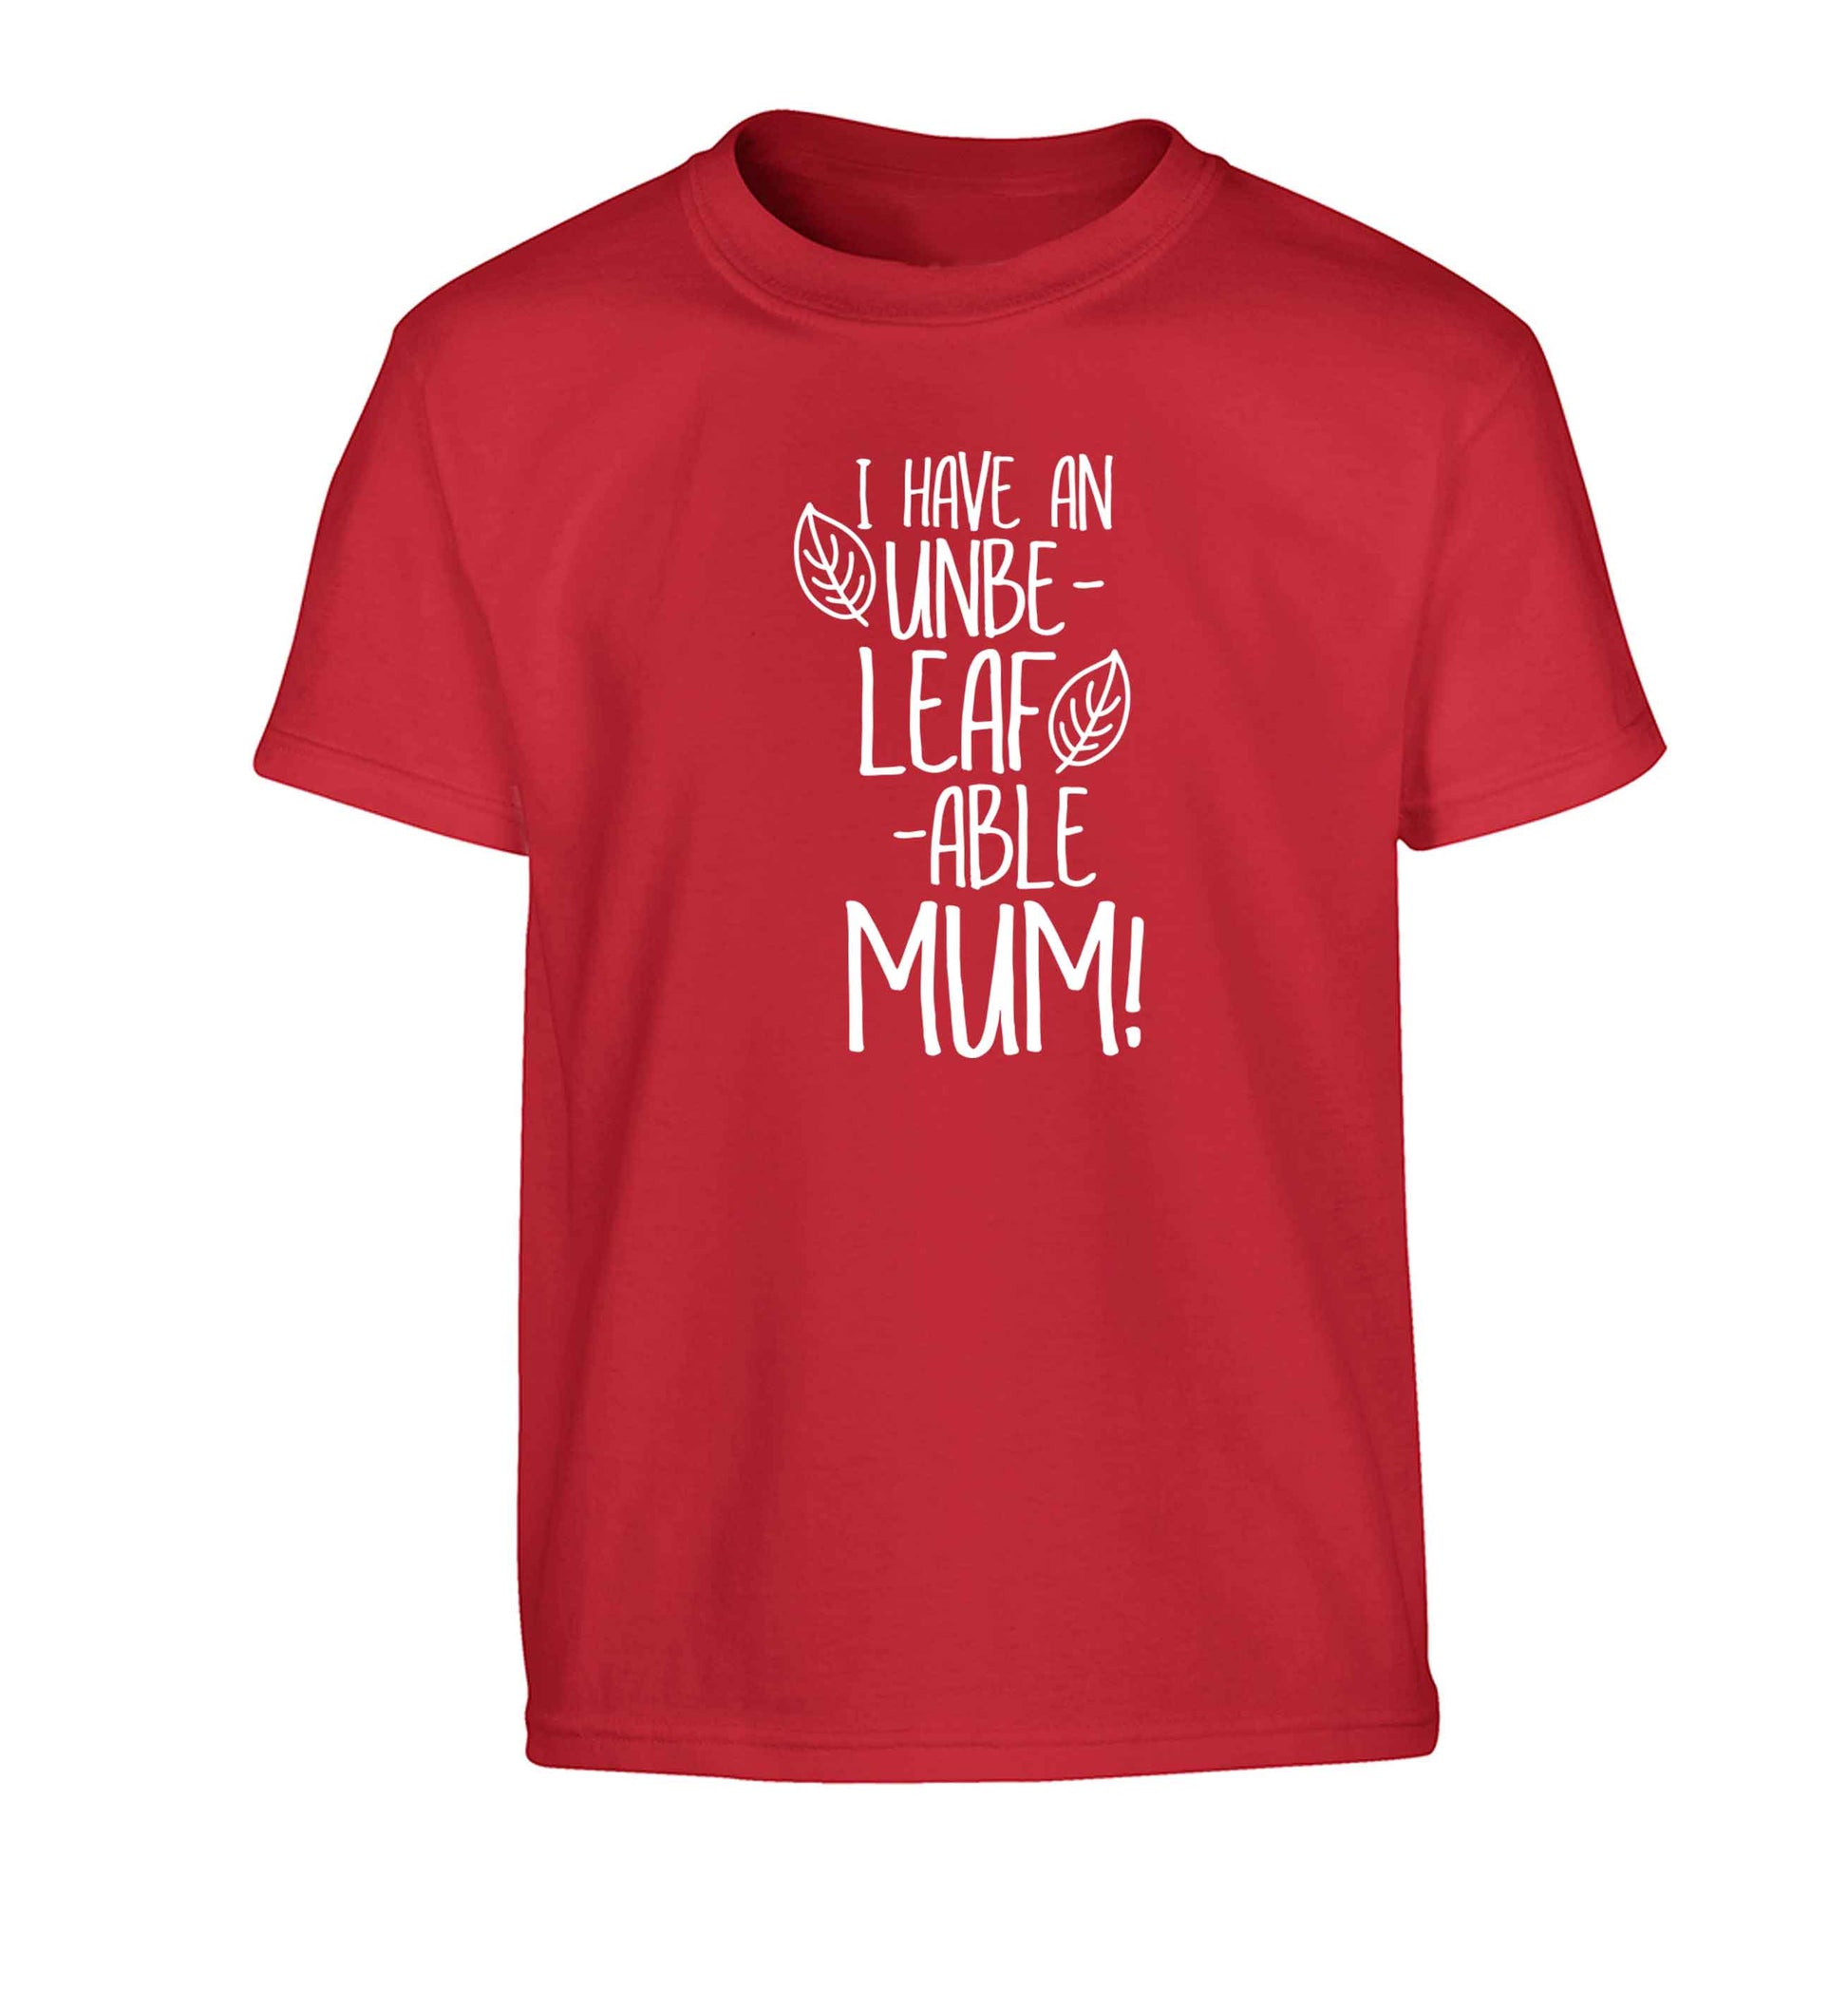 I have an unbeleafable mum! Children's red Tshirt 12-13 Years